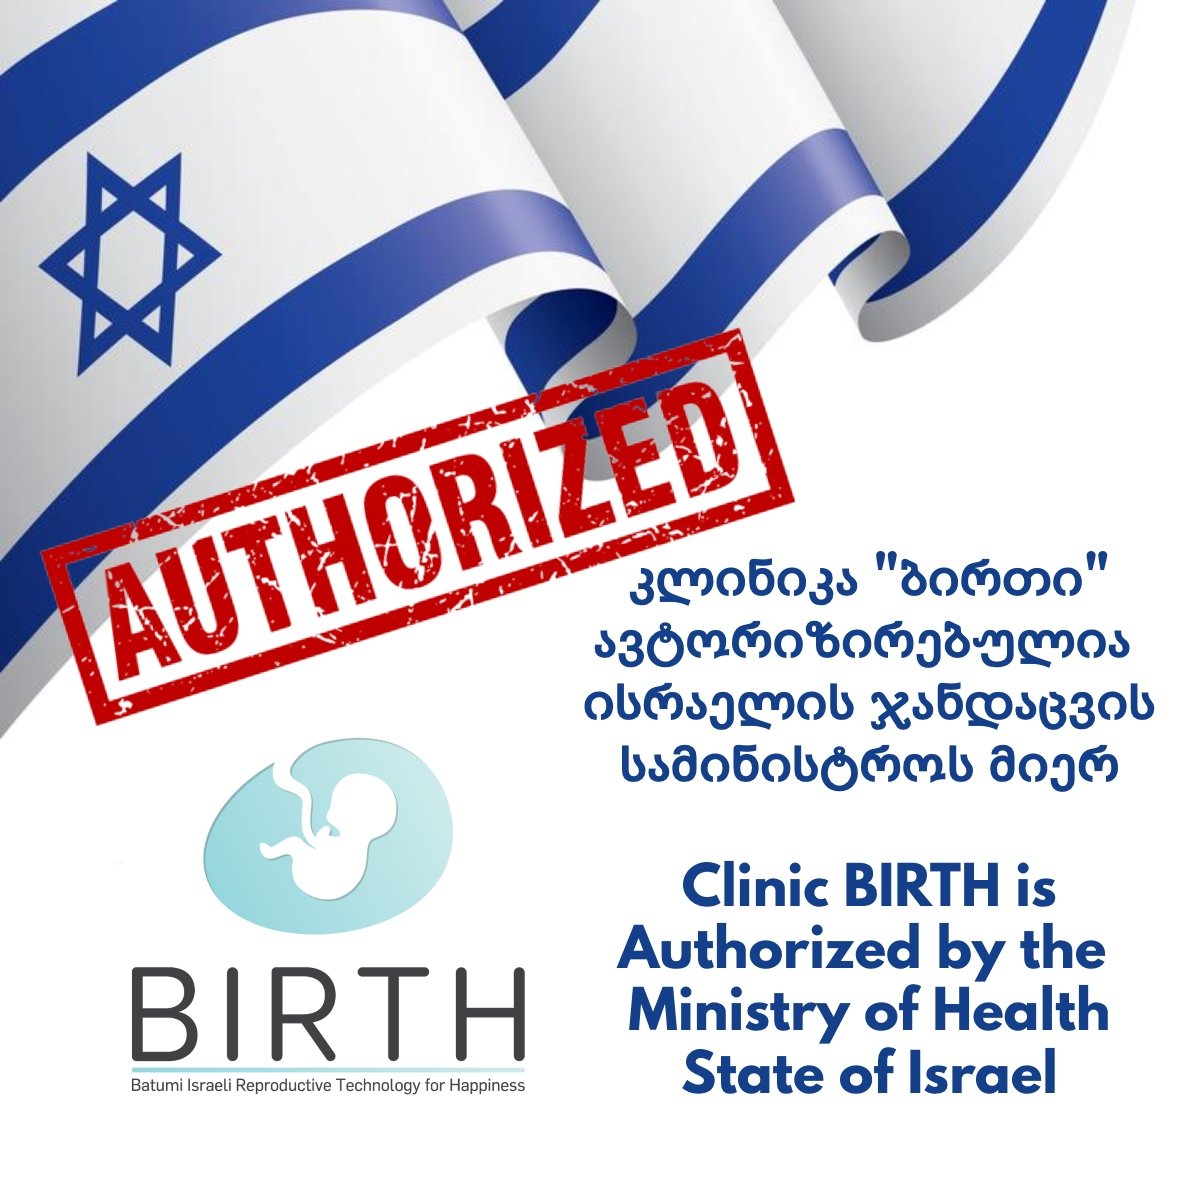 The Reproductive Clinic “Birth” has been authorized by the Ministry of Health of the State of Israel.